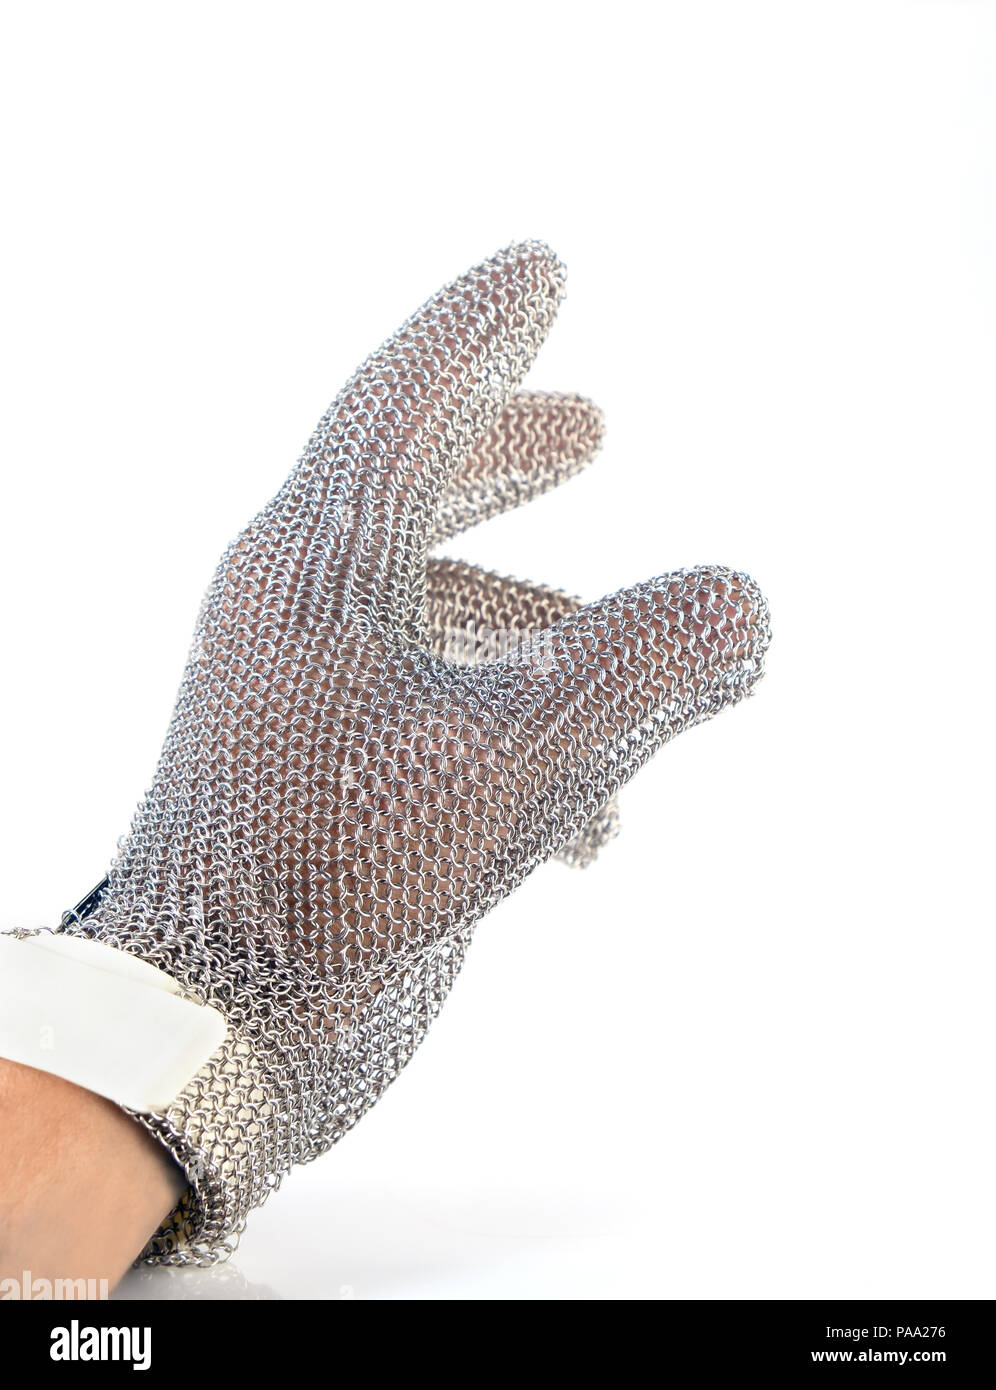 Hand with iron mesh glove on white background. Protection devices for industrial applications. Stock Photo